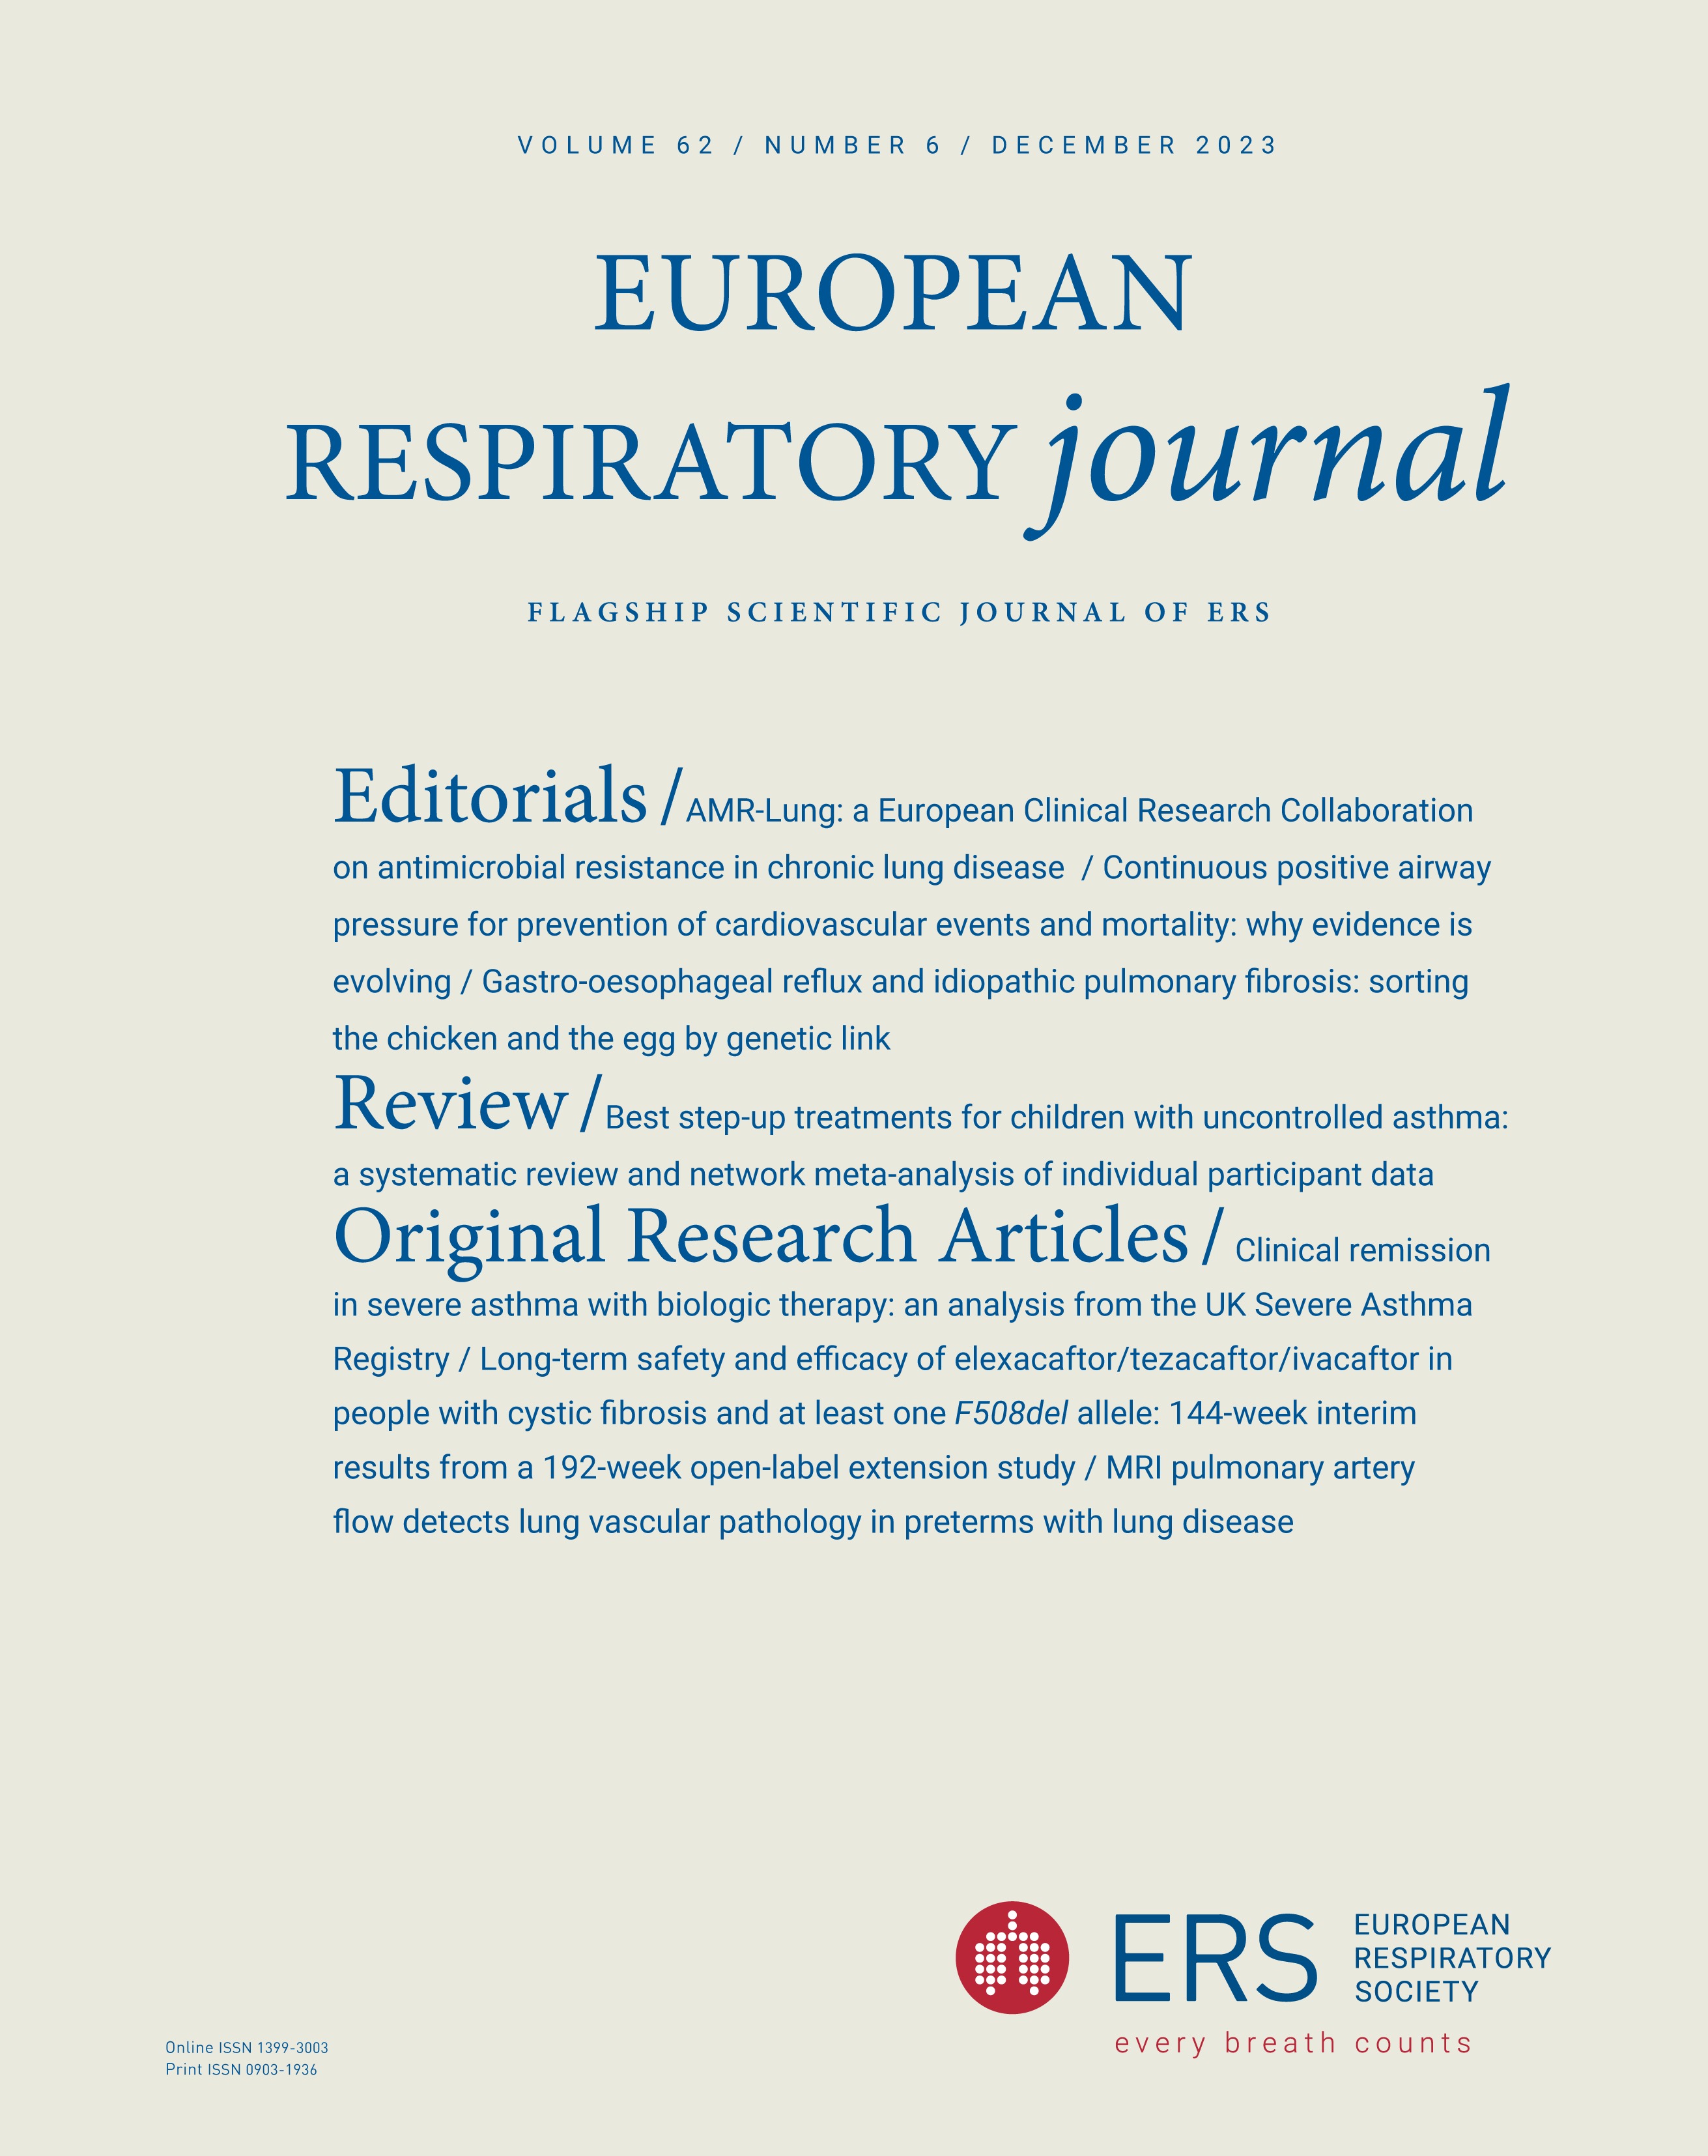 Supporting the case for a targeted approach for elexacaftor/tezacaftor/ivacaftor in people with cystic fibrosis with no F508del CFTR variant: further analysis for the French compassionate use programme